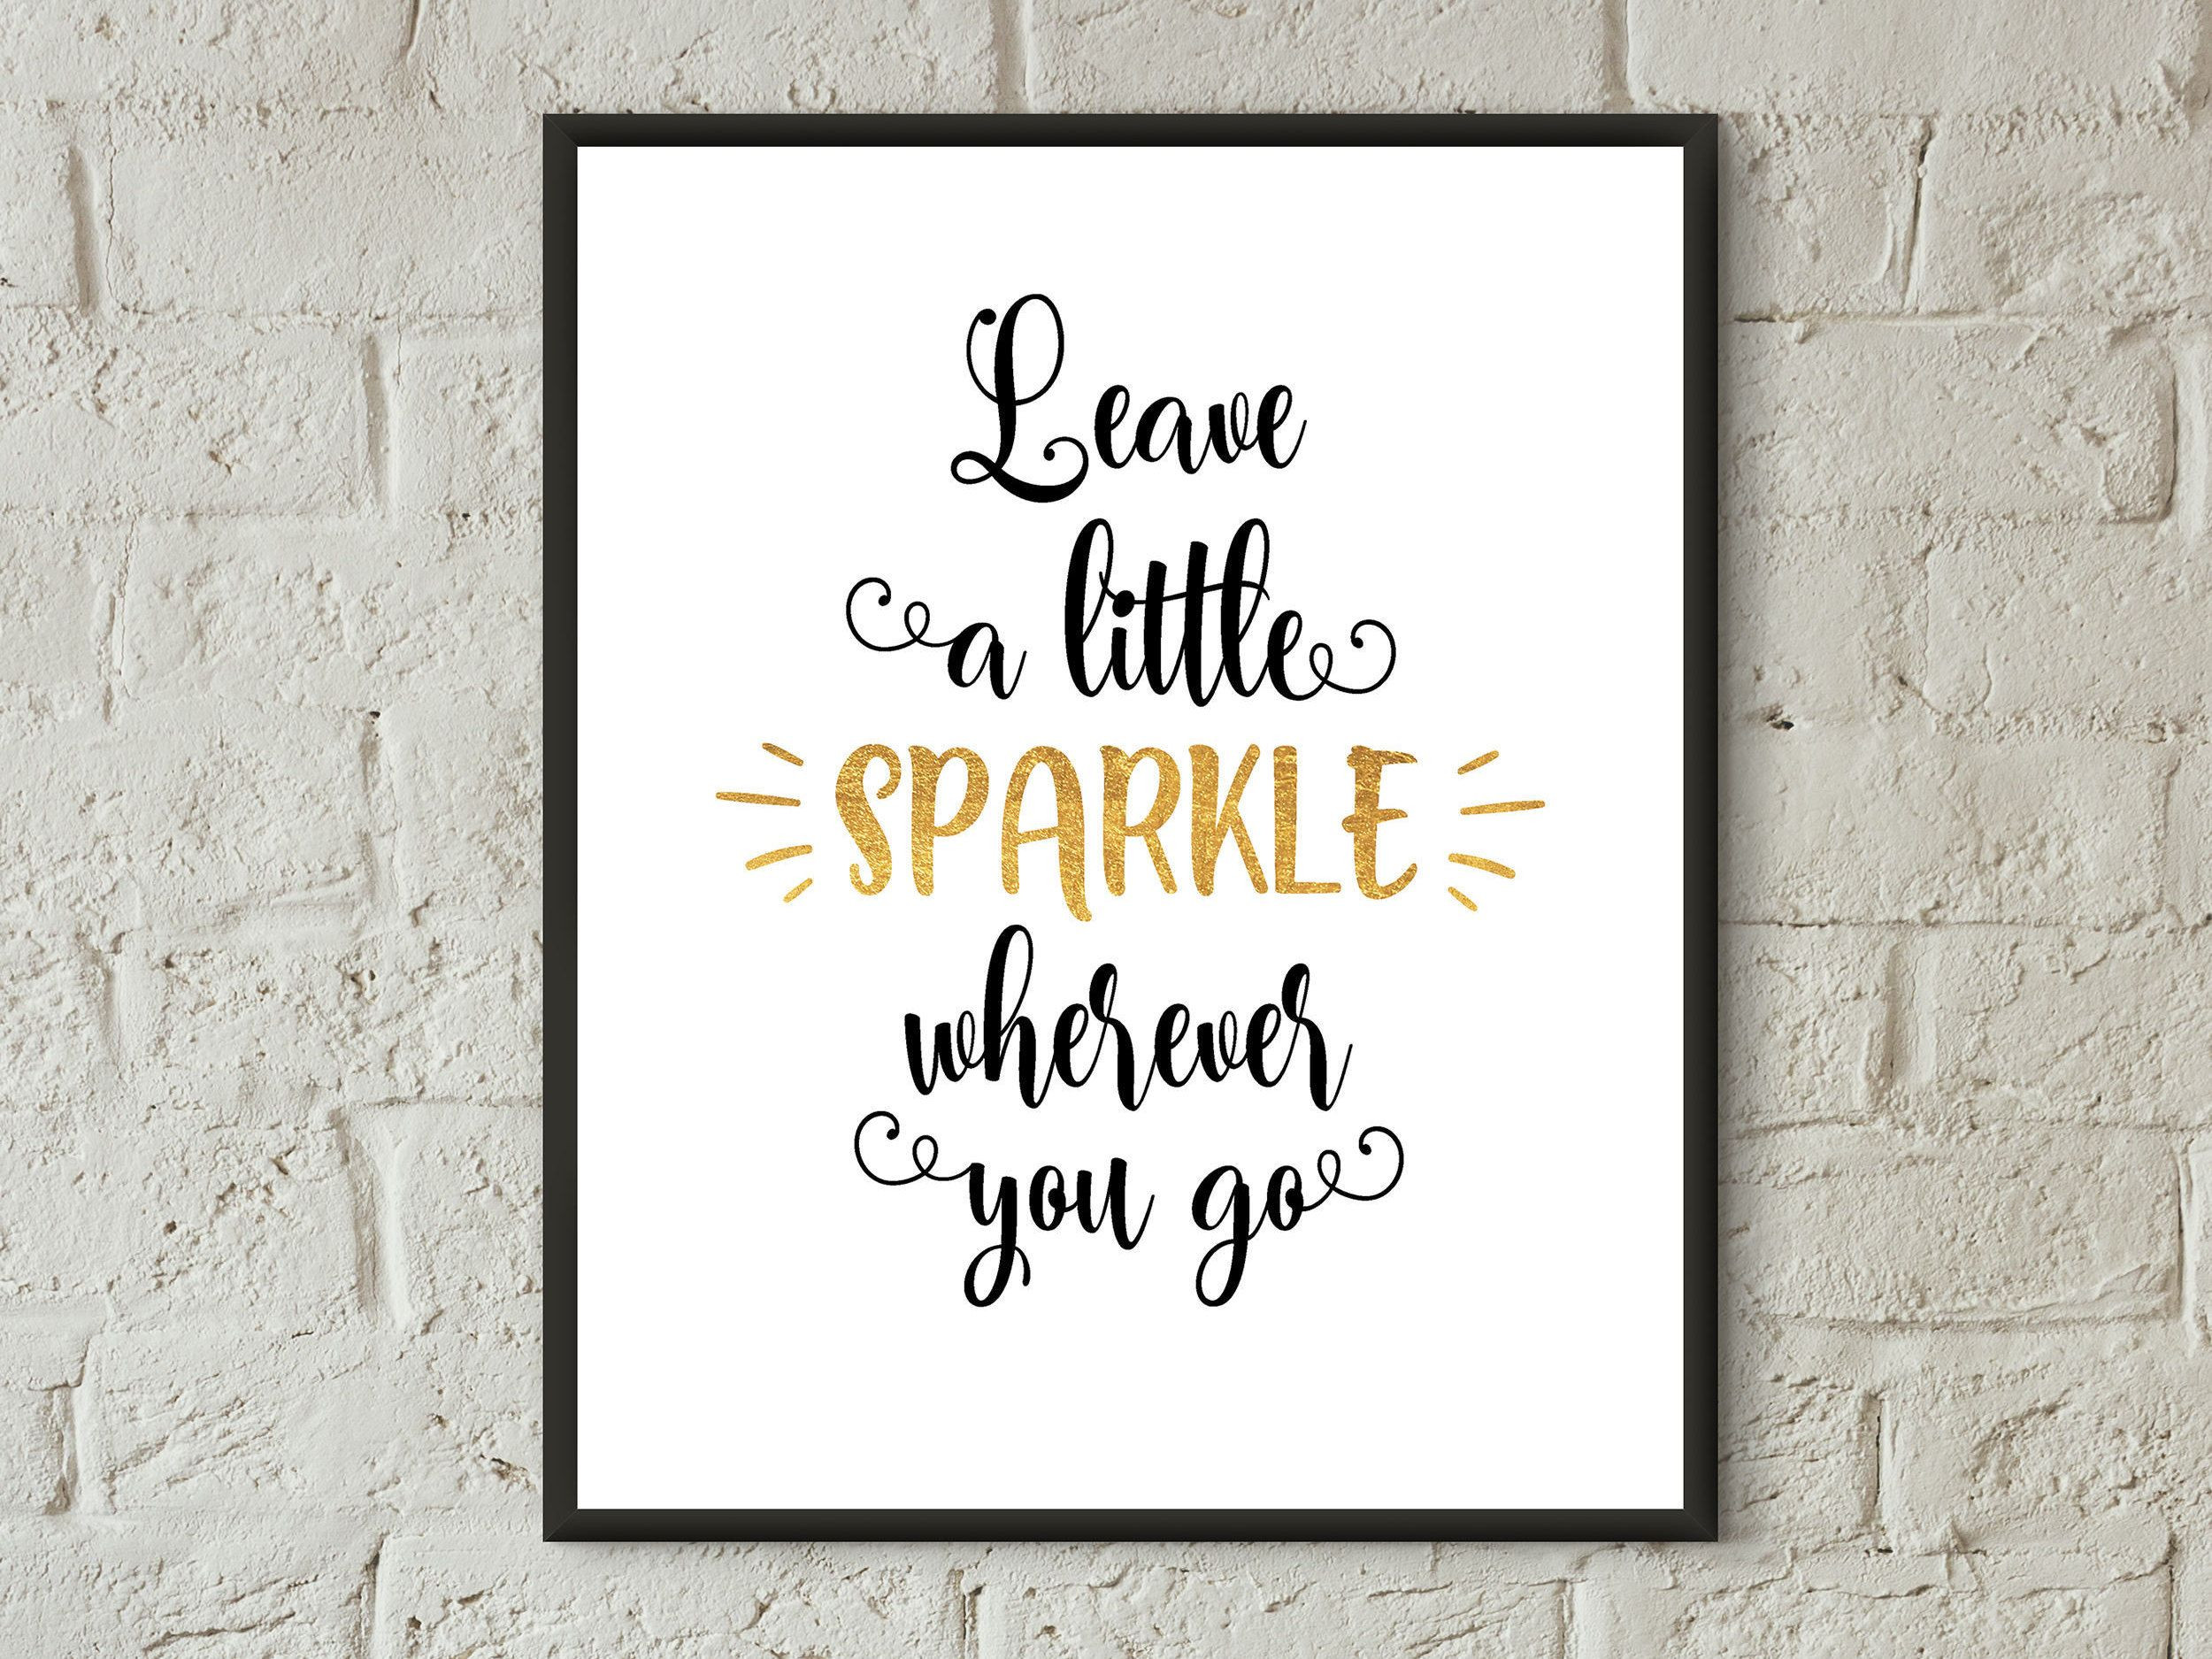 Quotes For Kids Rooms
 Pin on sweet soul printables